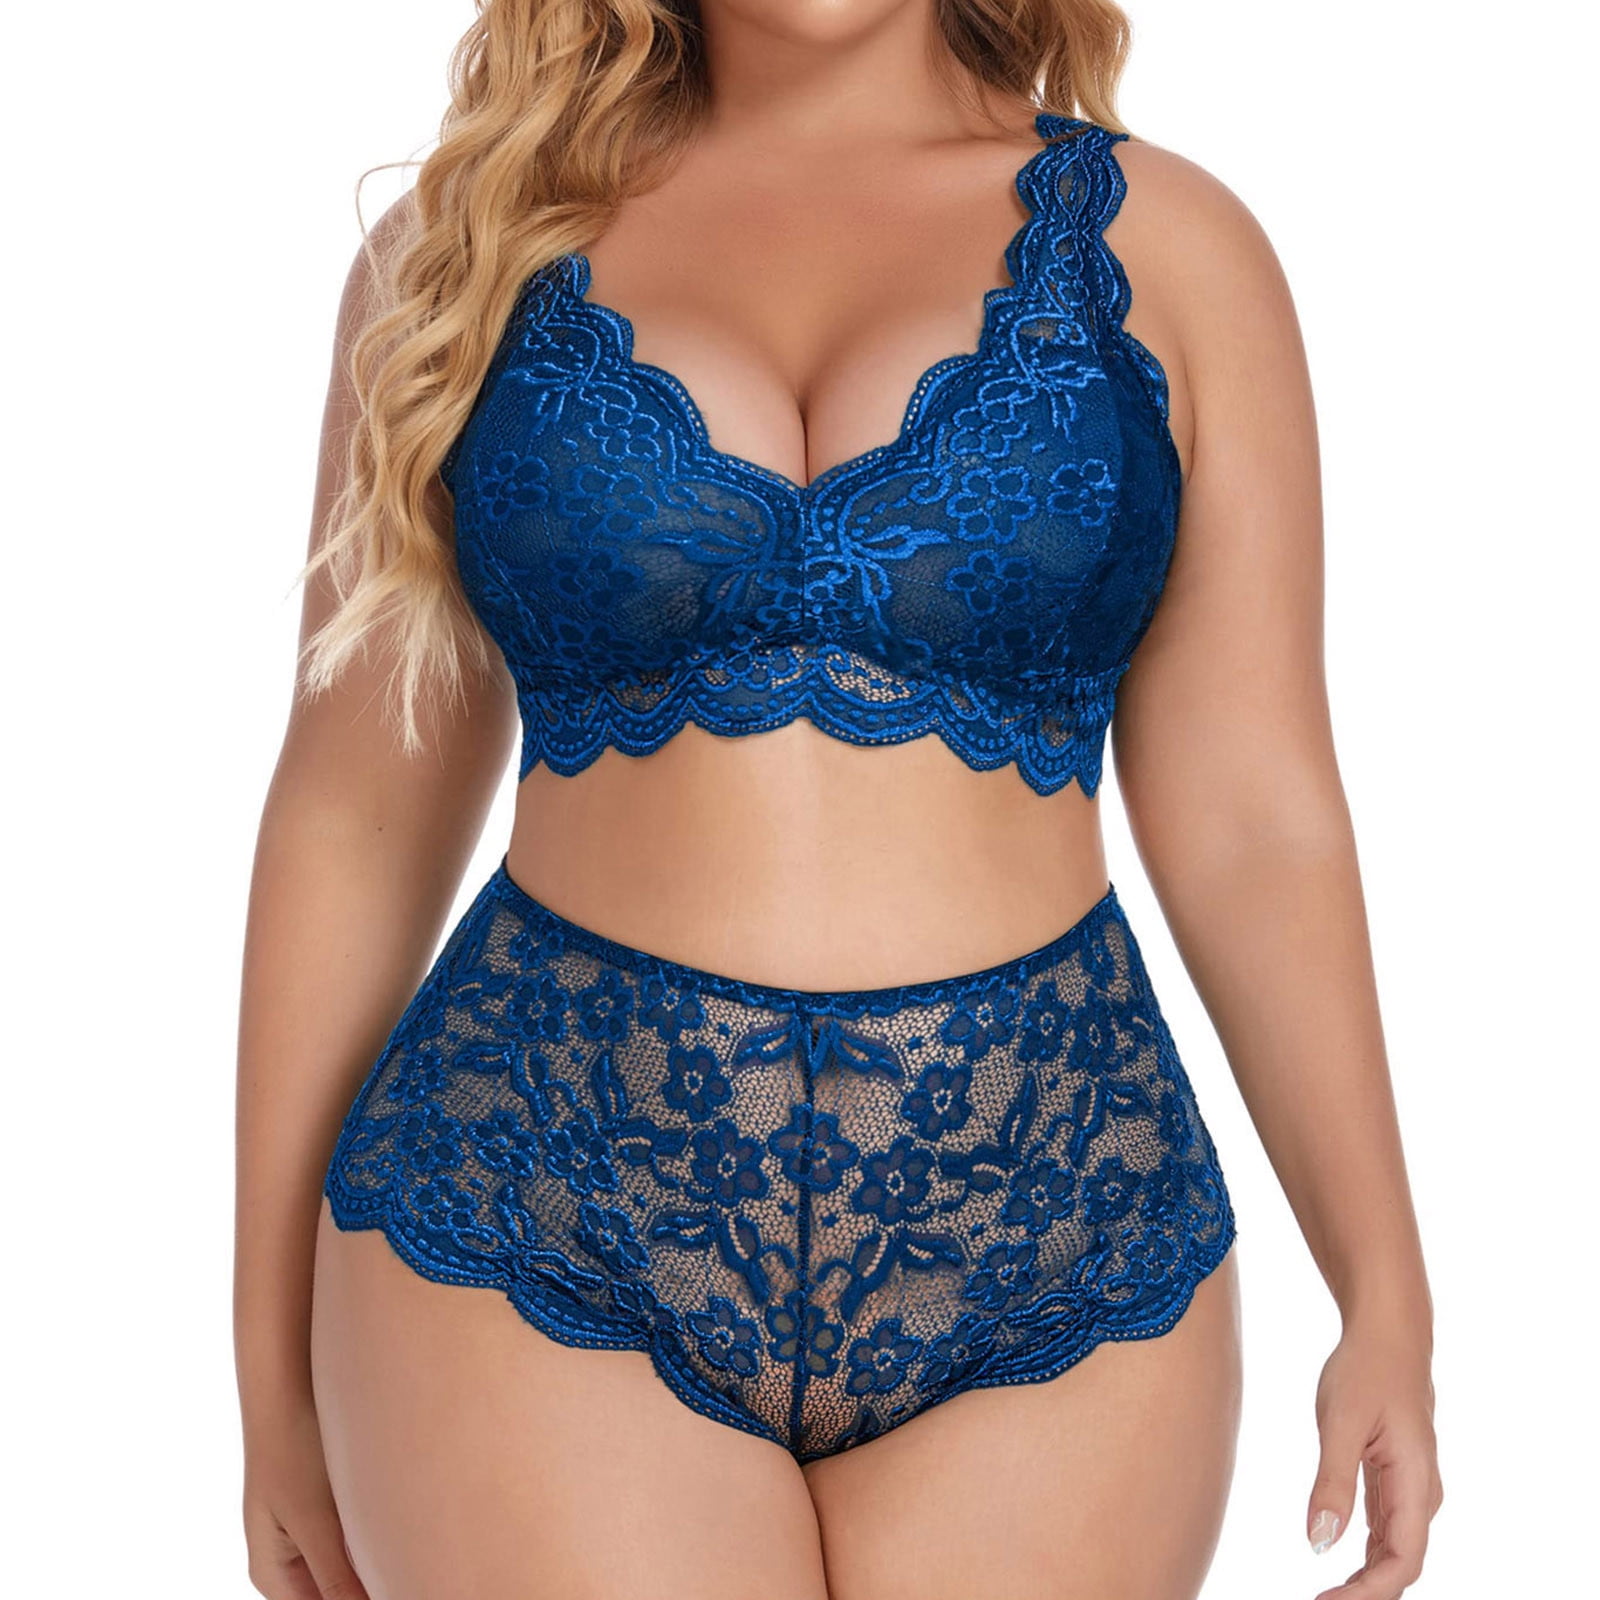 Buy China Wholesale Women Lingeries-sexy Bra And Panty Sets Blue Plus Size Lingerie  Set Extra Large & Plus Size Lingerie Set $6.85